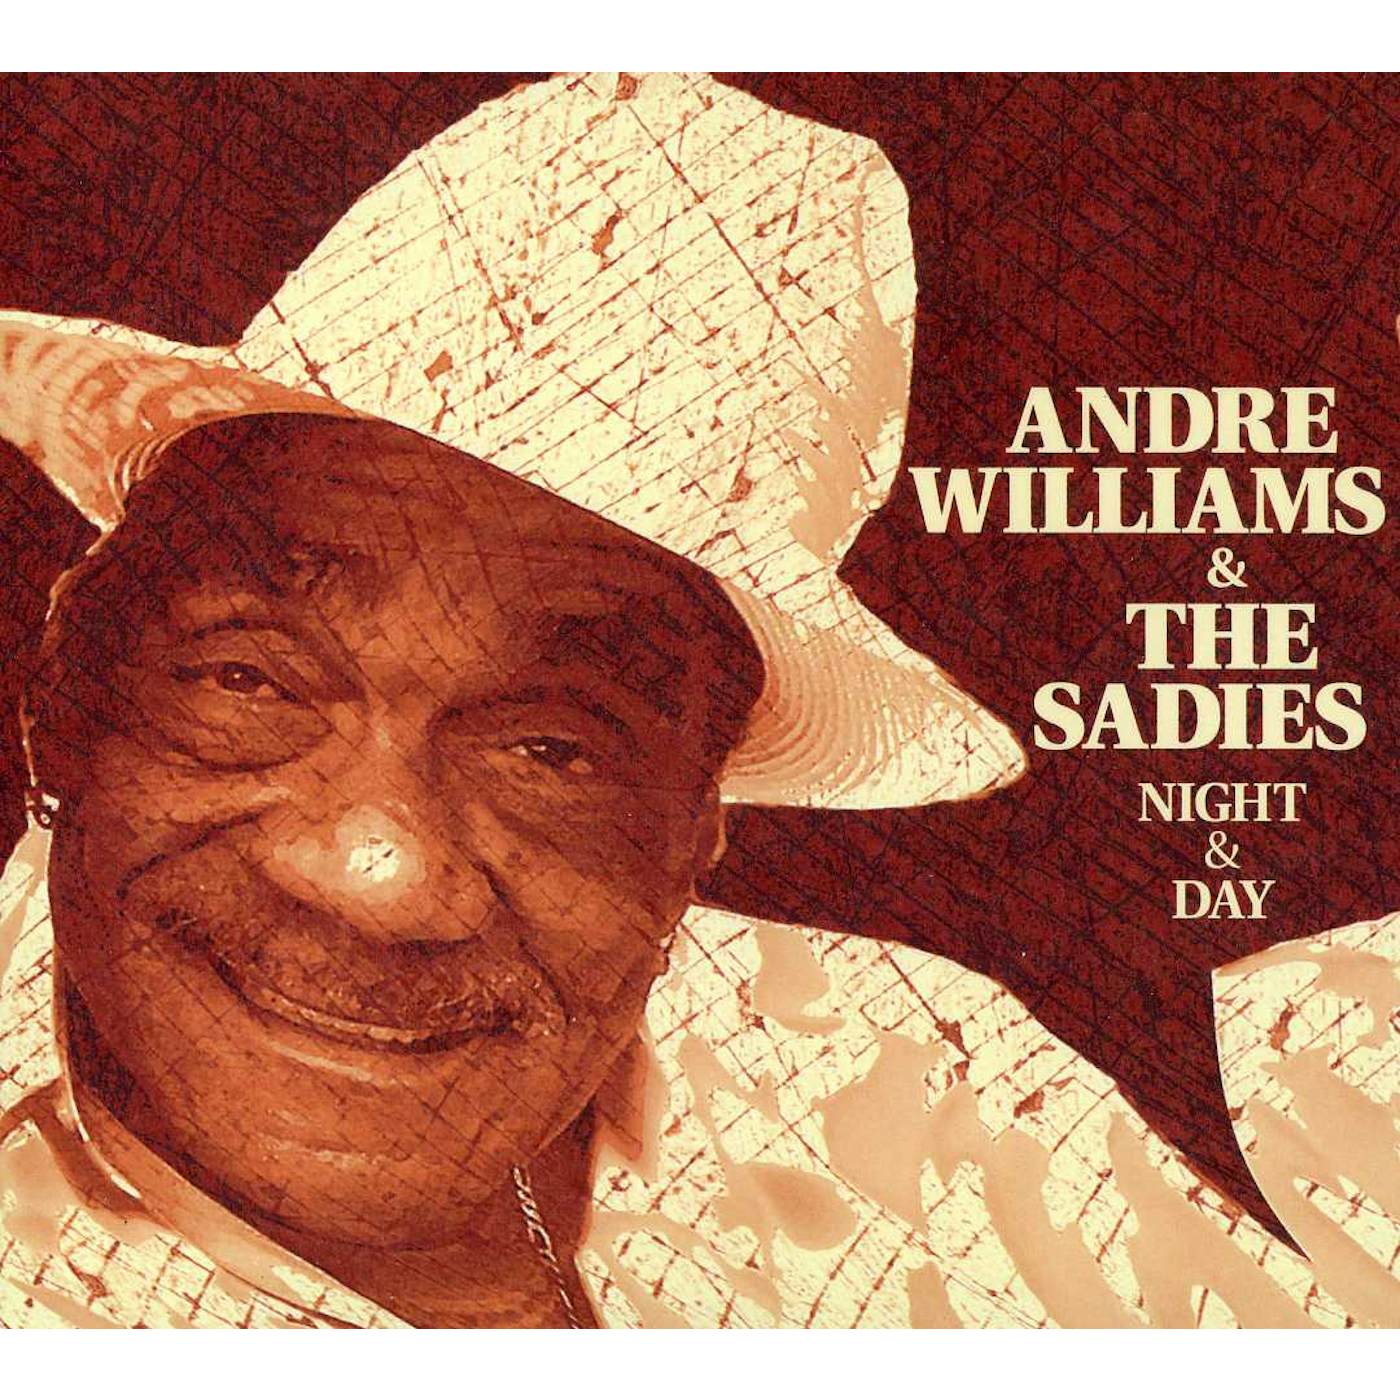 Andre Williams & the Sadies NIGHT & DAY CD